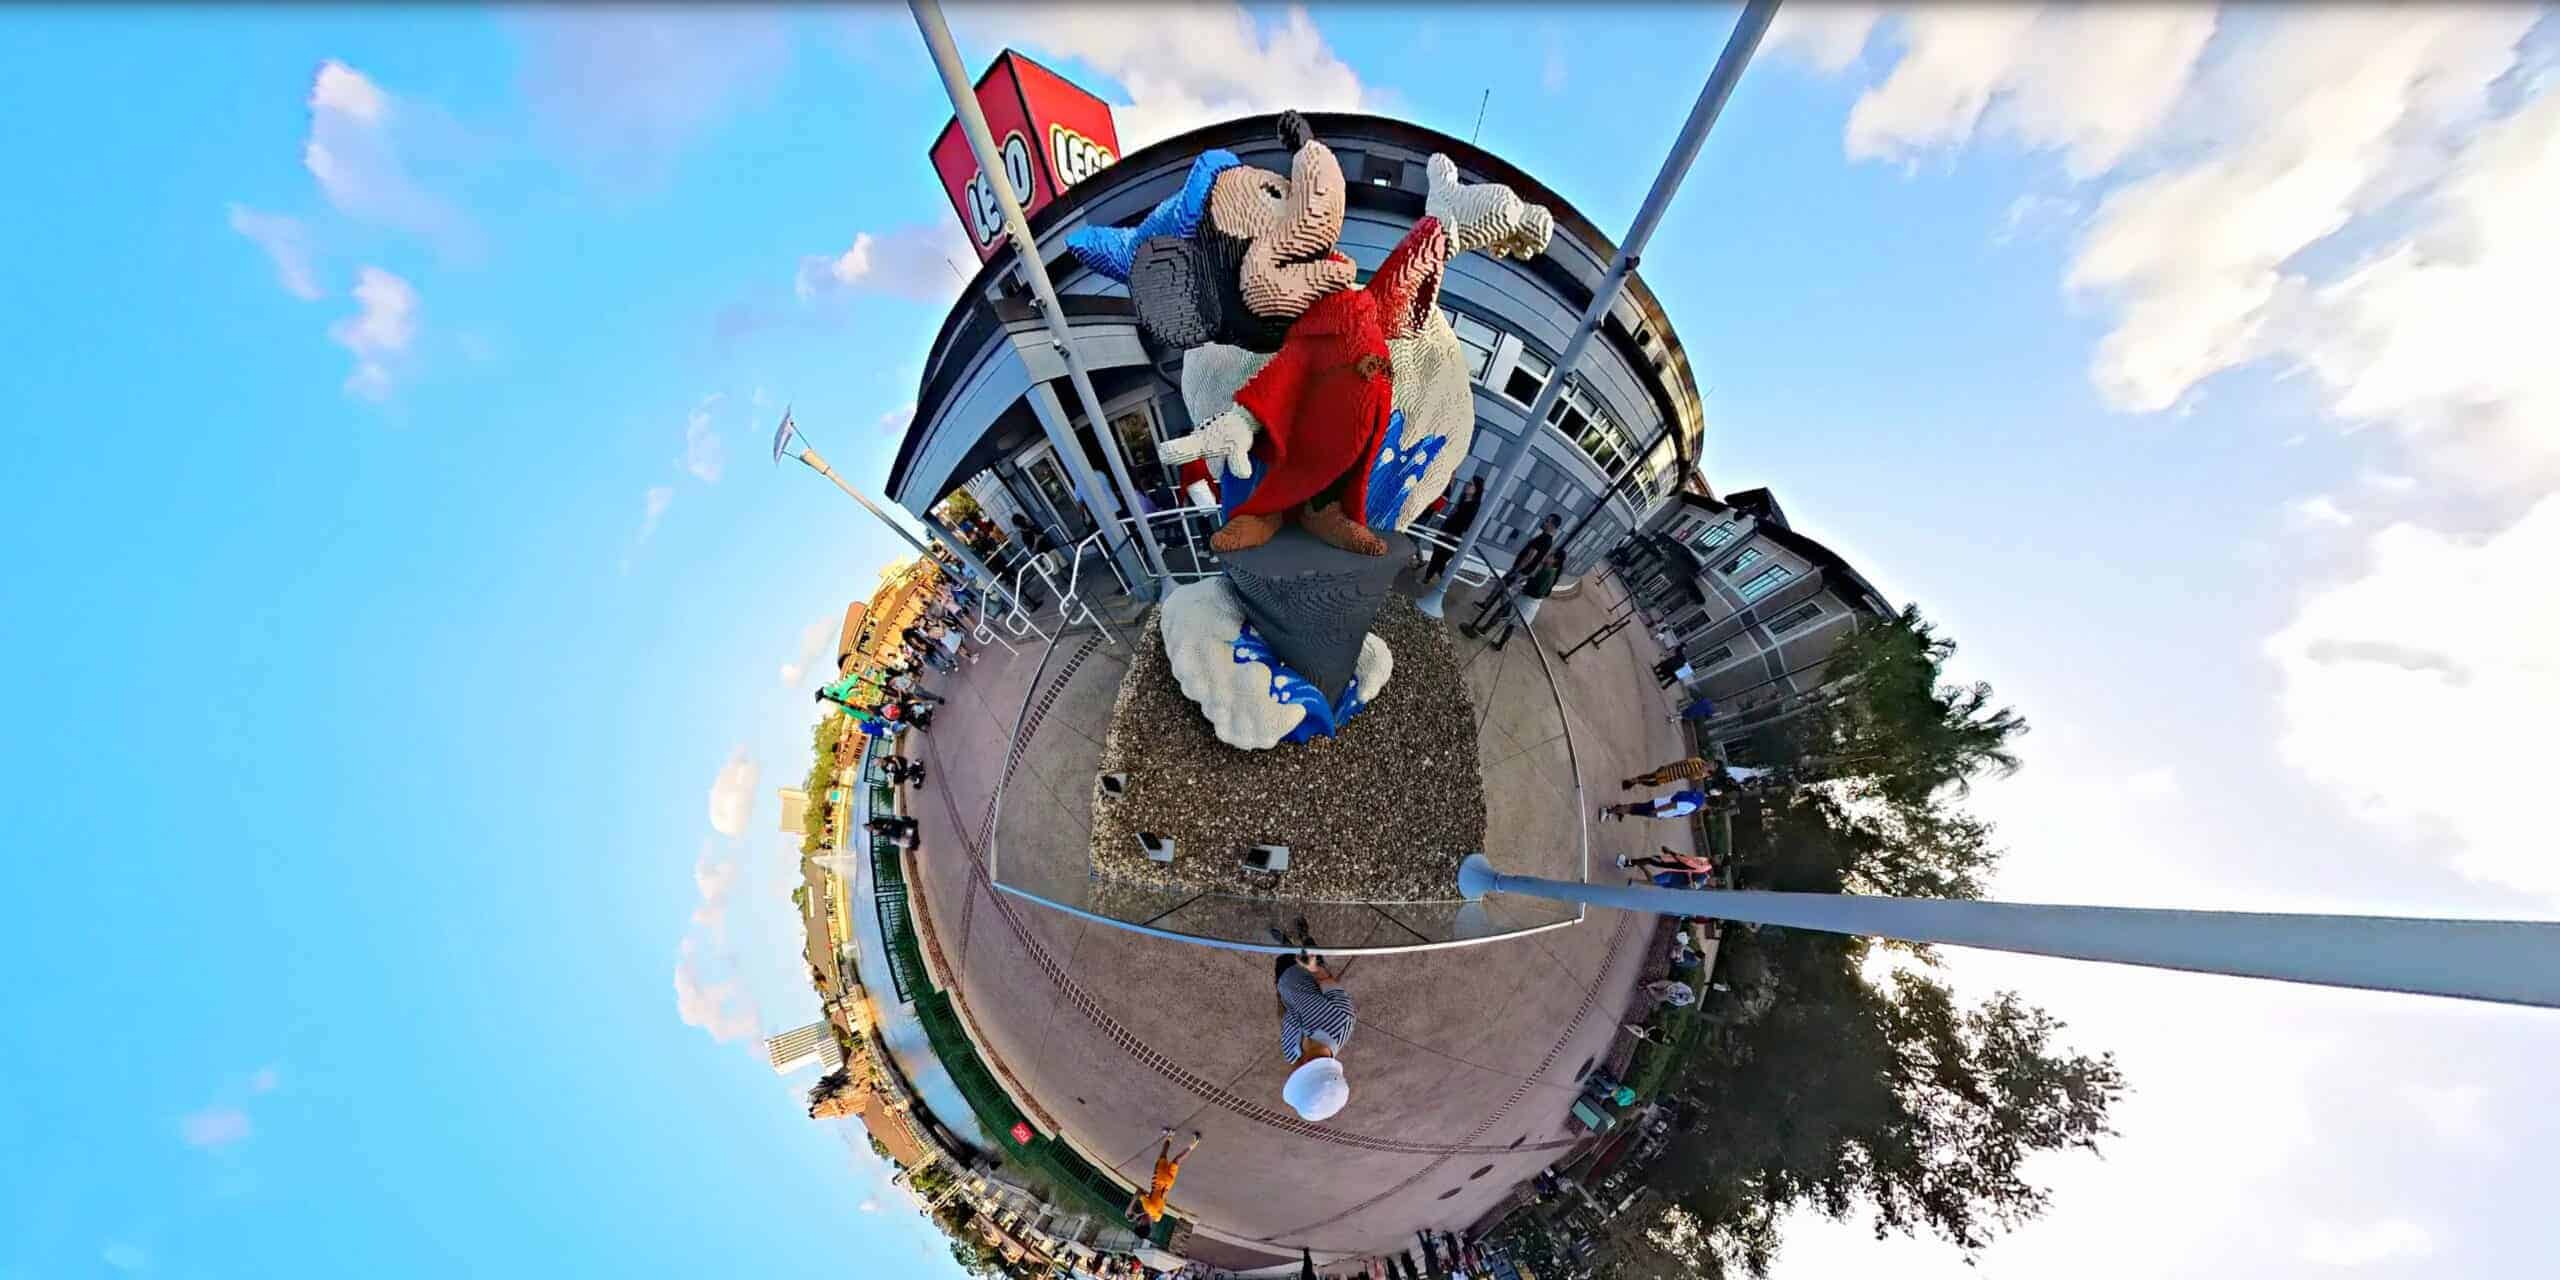 Tiny planet view
 made possible
 by a 360 camera